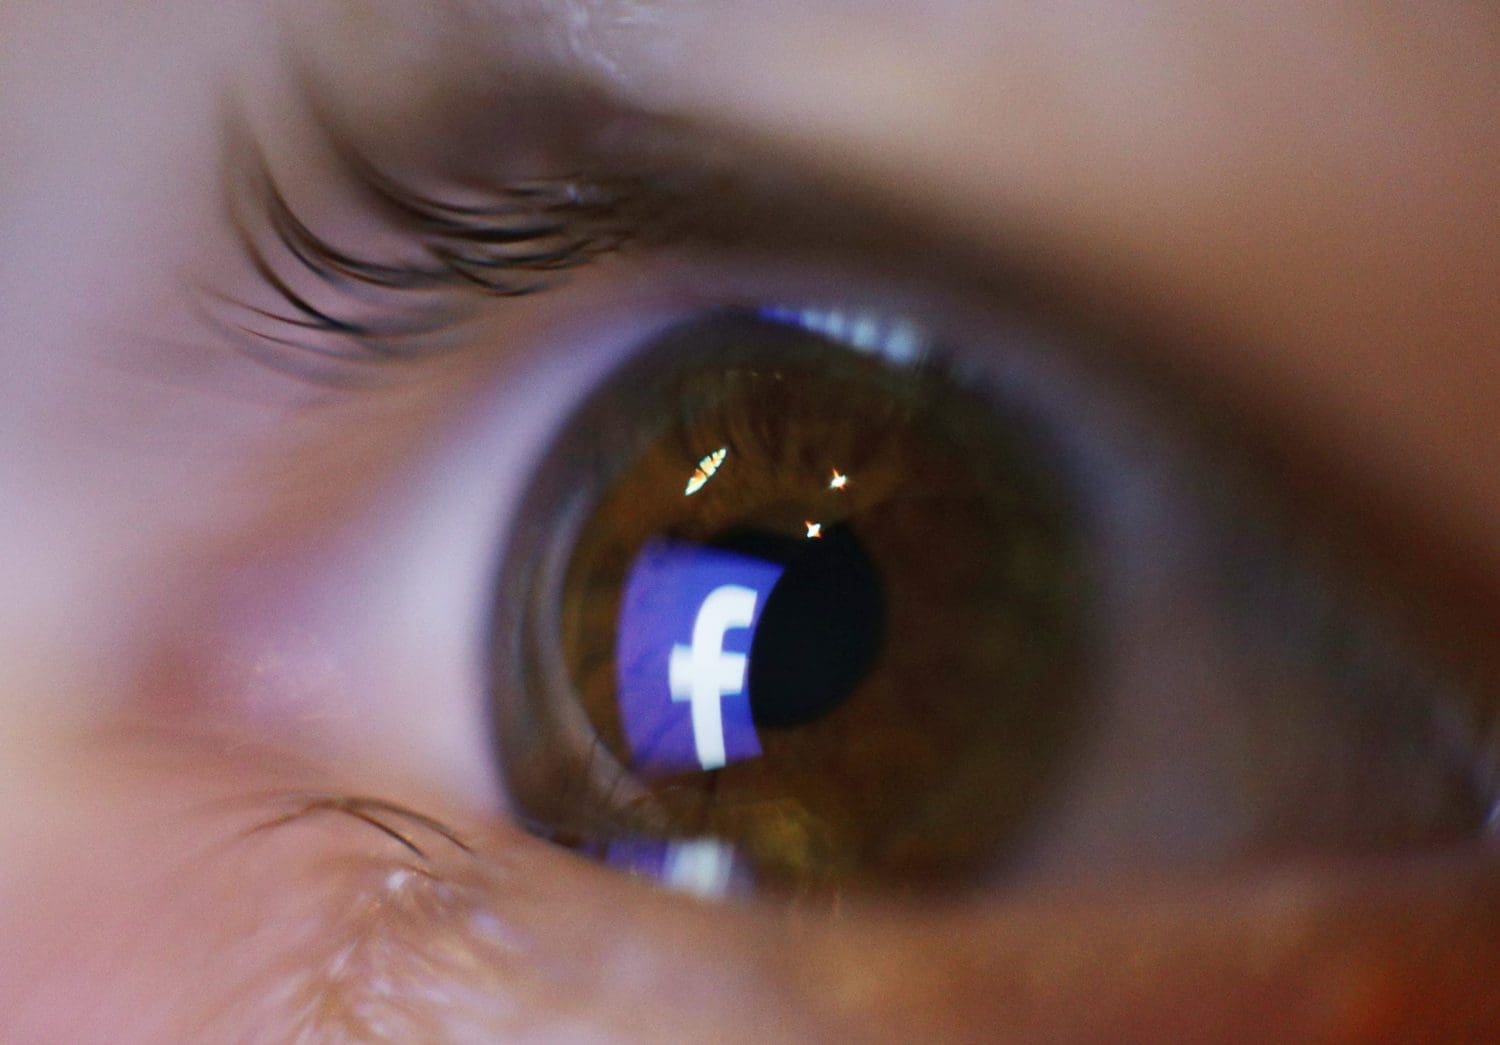 An eyeball with the Facebook logo reflecting in it